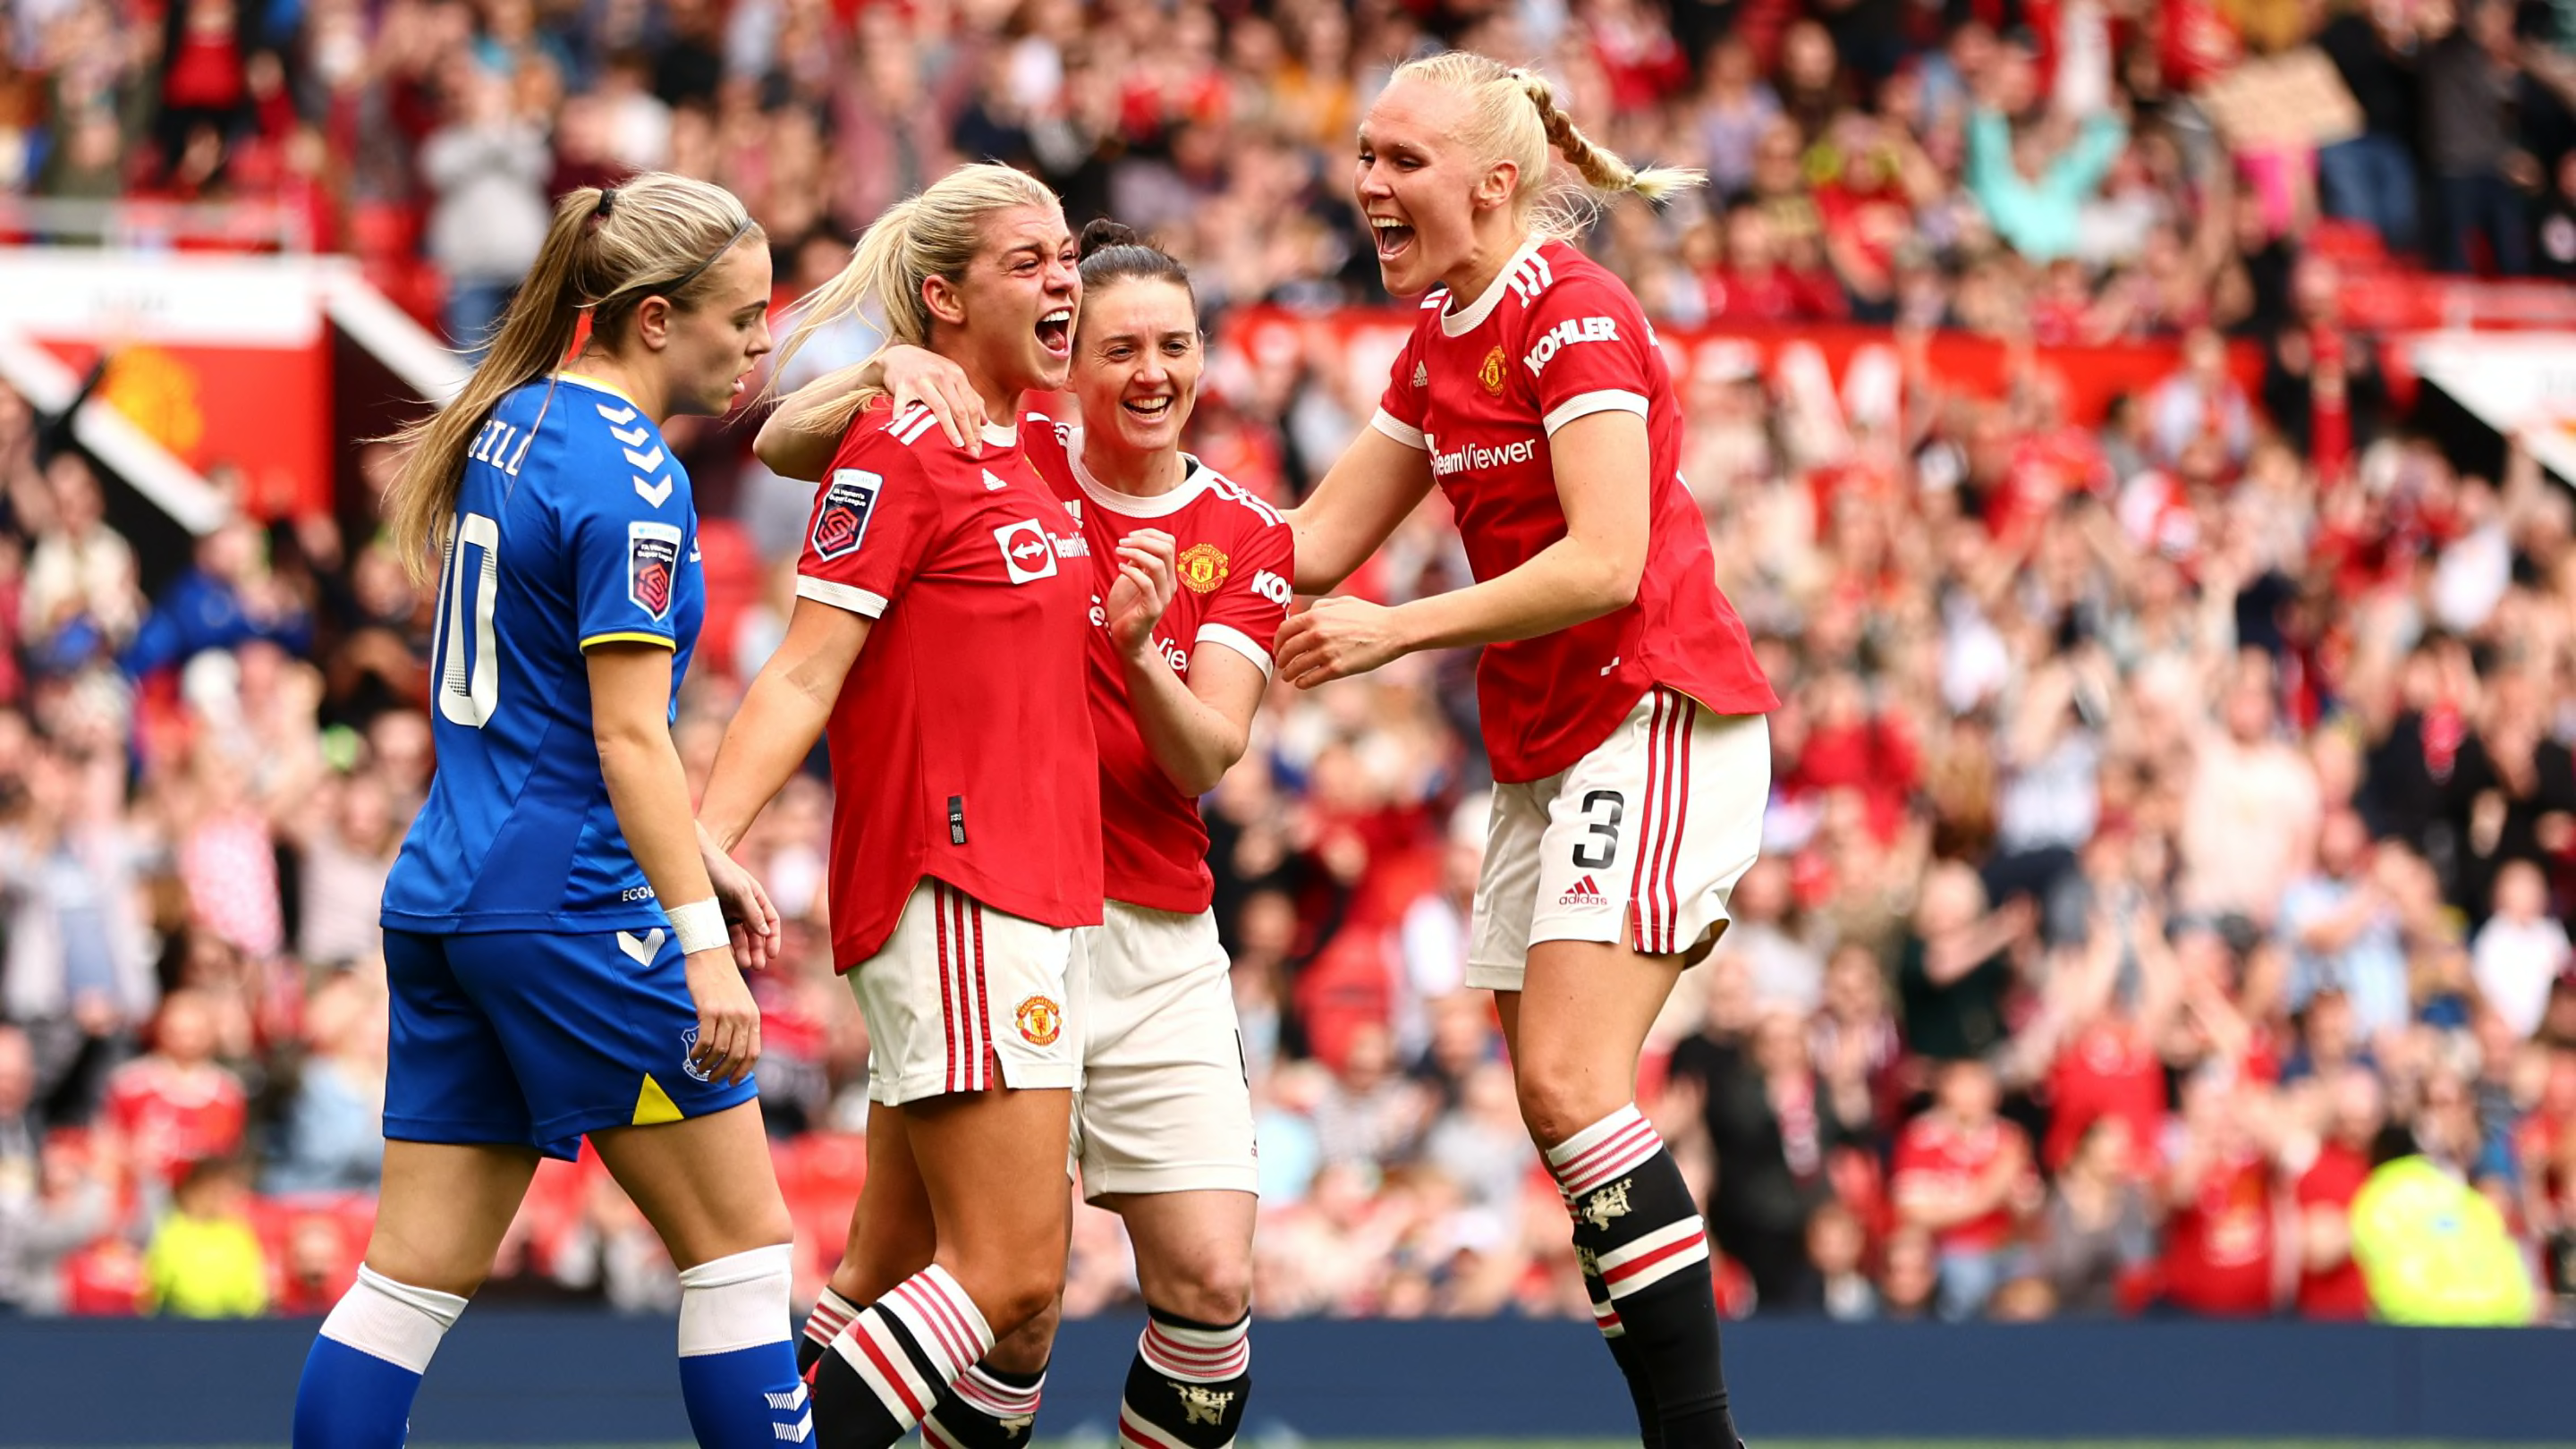 Man Utd to play WSL match at Old Trafford in December